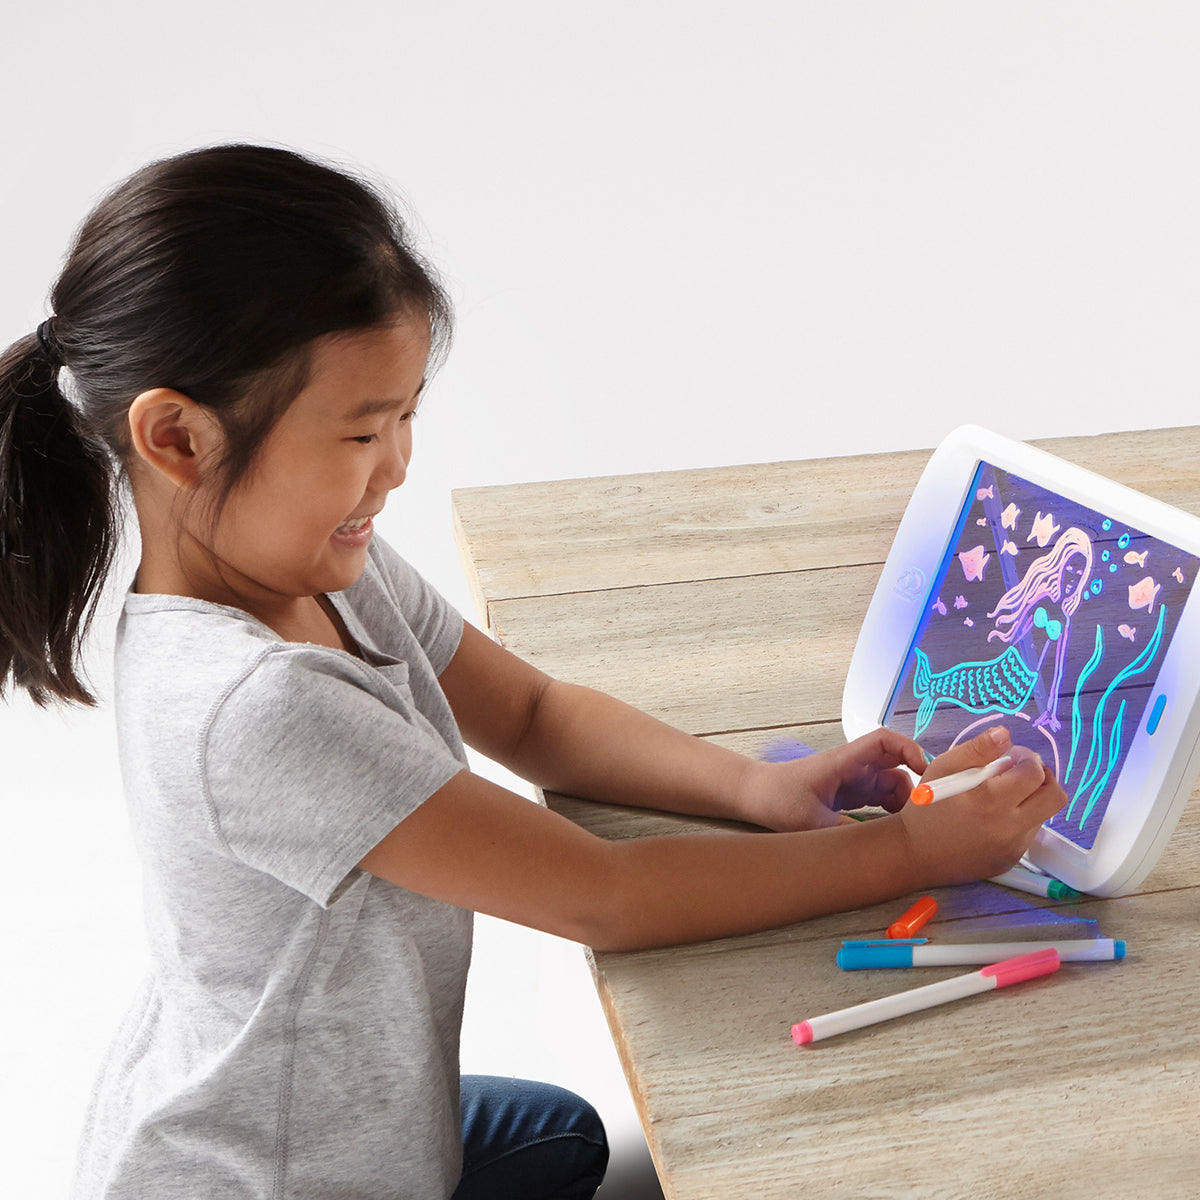 Discovery Neon Glow Drawing Easel with Markers